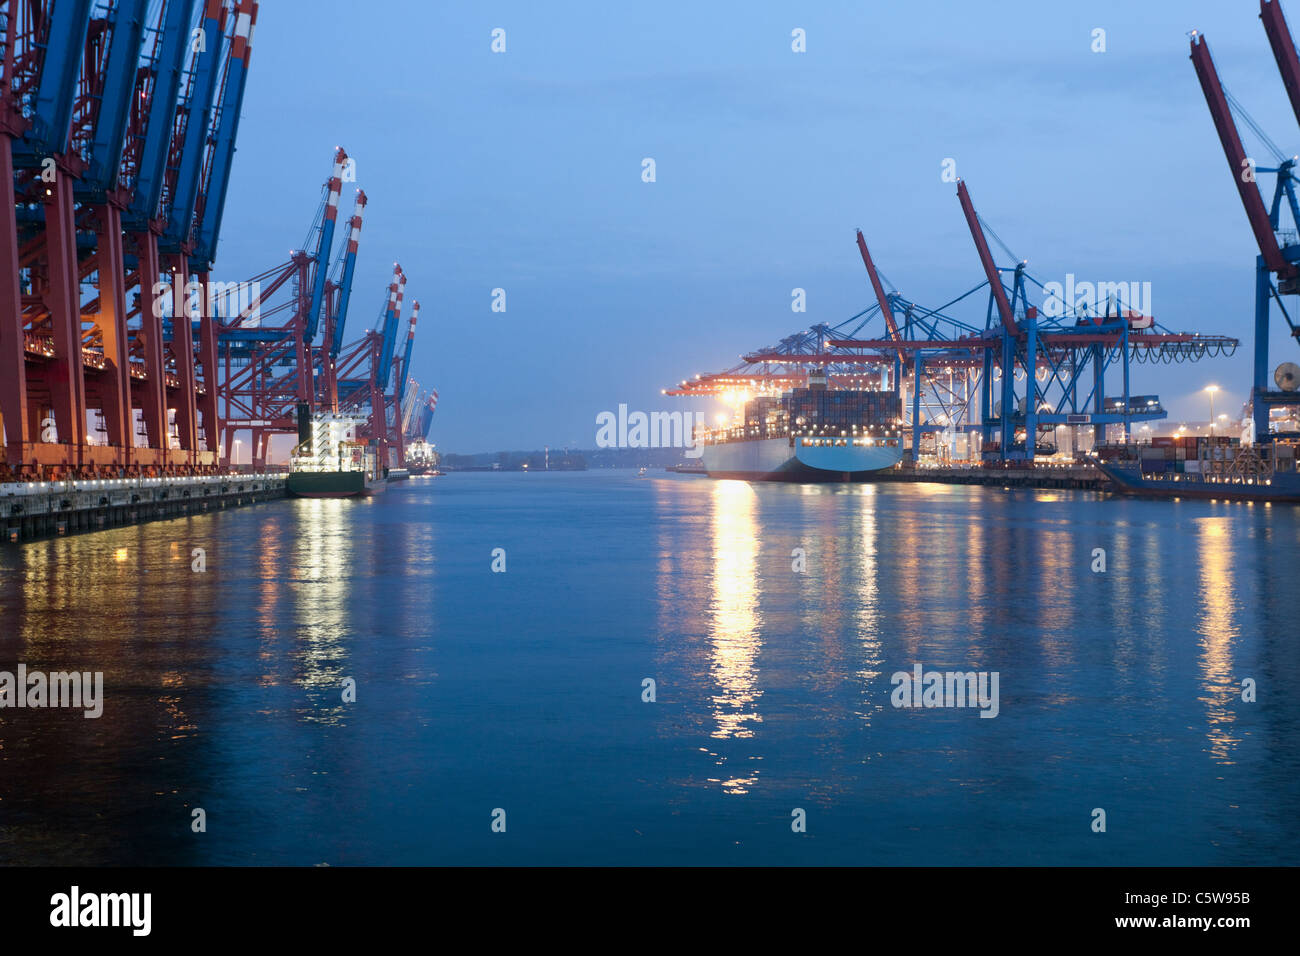 Germany, Hamburg, Burchardkai, View of container ship at harbour Stock Photo